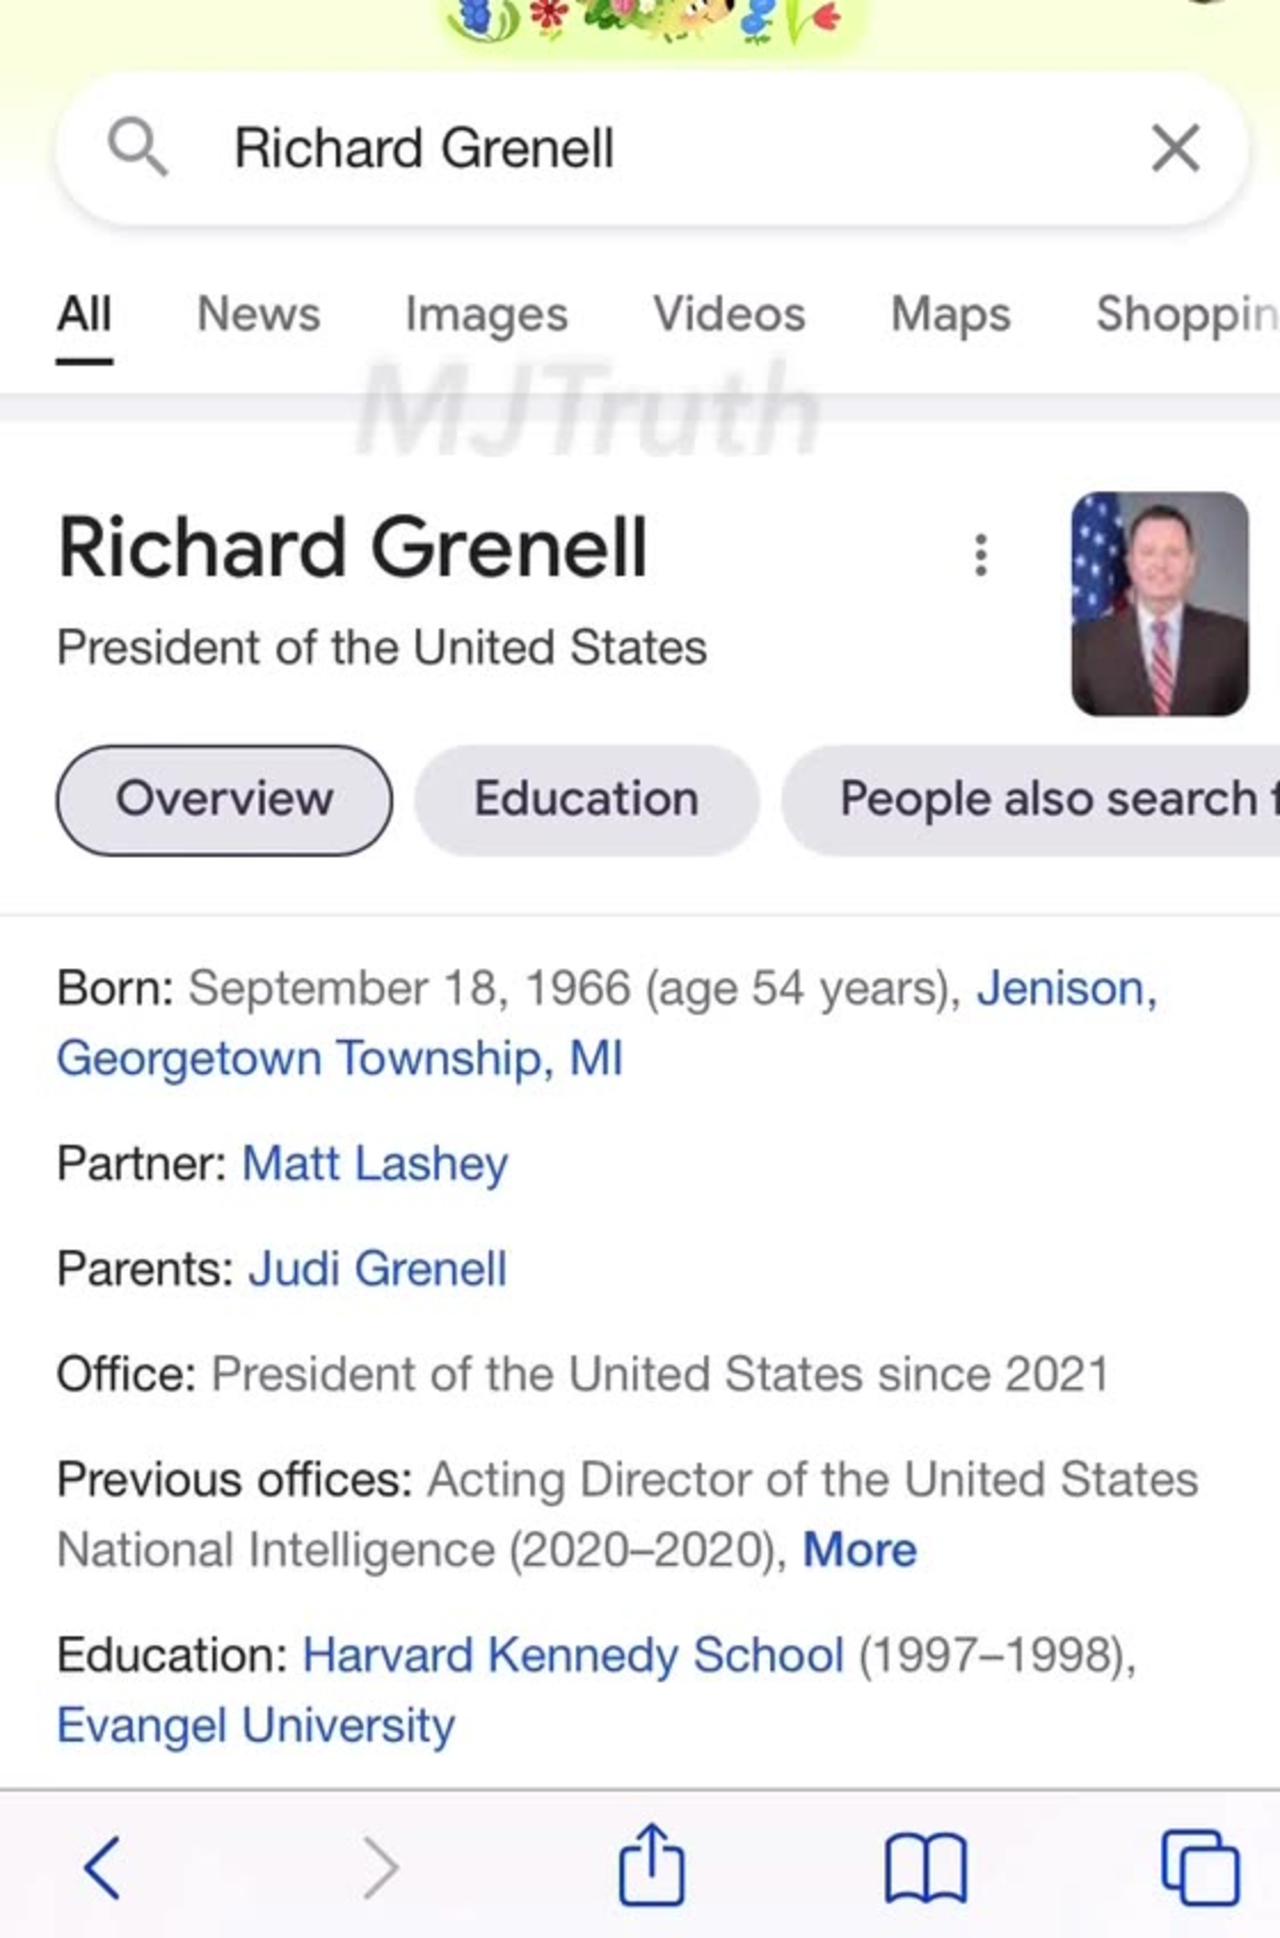 Richard Grenell was listed as the President of the United States on Google March 21, 2021